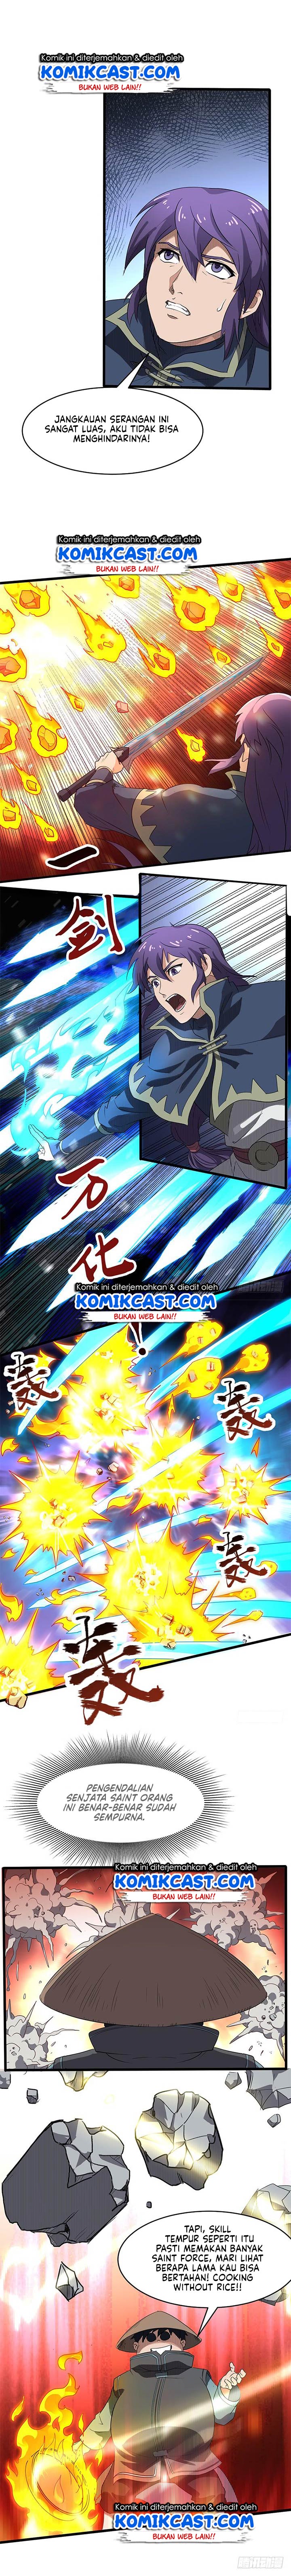 Chaotic Sword God Chapter 177